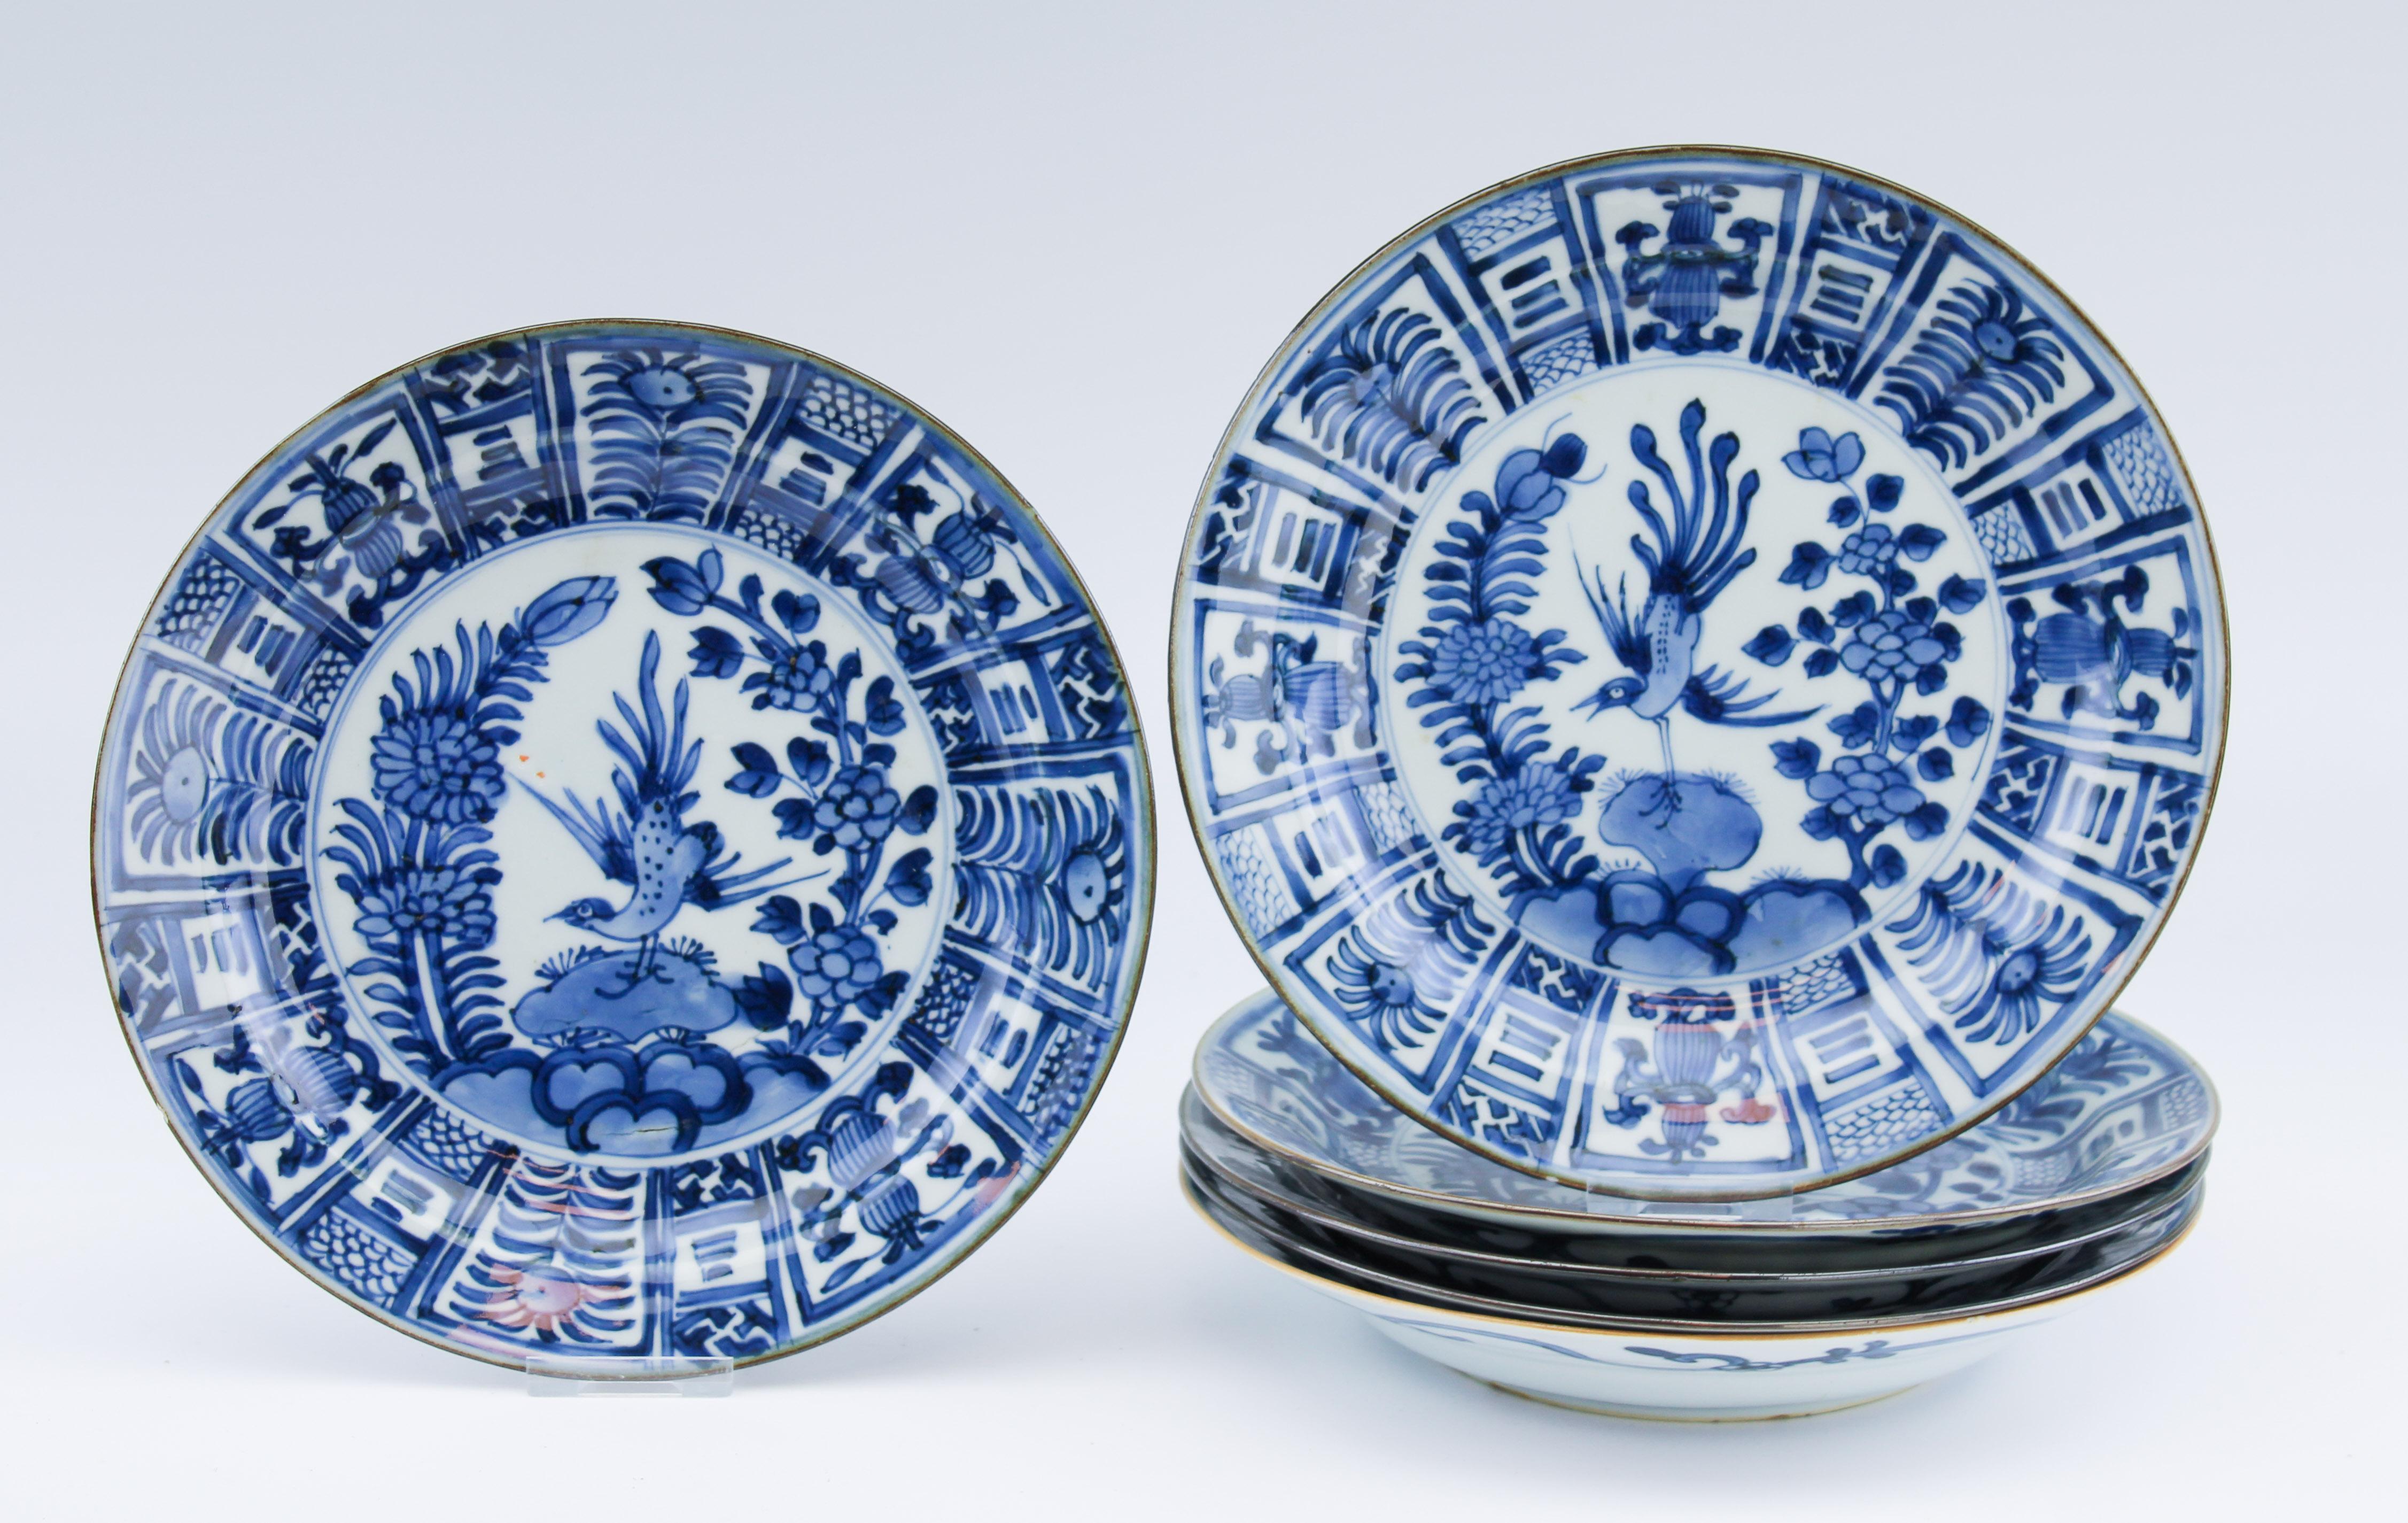 A very nicely decorated SET of Dishes in Blue and white, Kangxi Period in Japanese Kraak Style. Around 1700. Decorated with flowers and birds

Condition
Very good condition. Minor frits and chips to the rim. Two with a hairline. 1 to rim, 1 to base